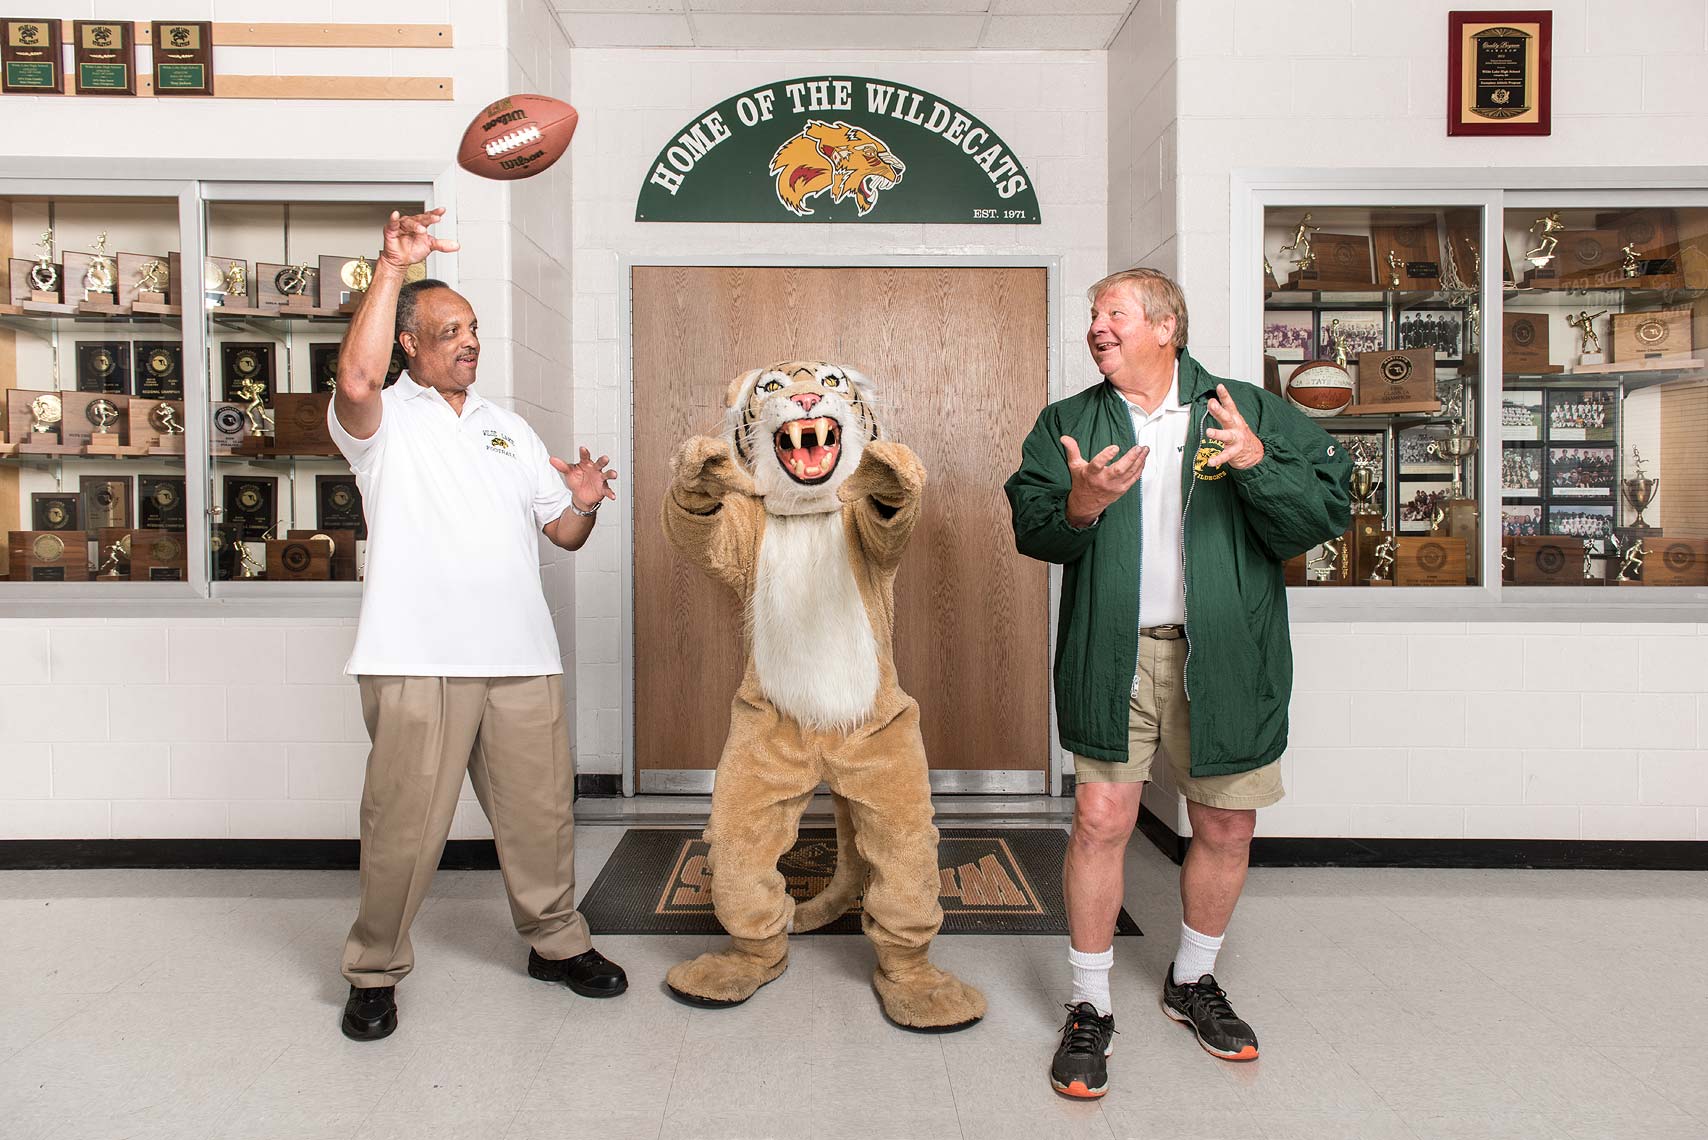 Two football coaches tossing a football with a tiger mascot